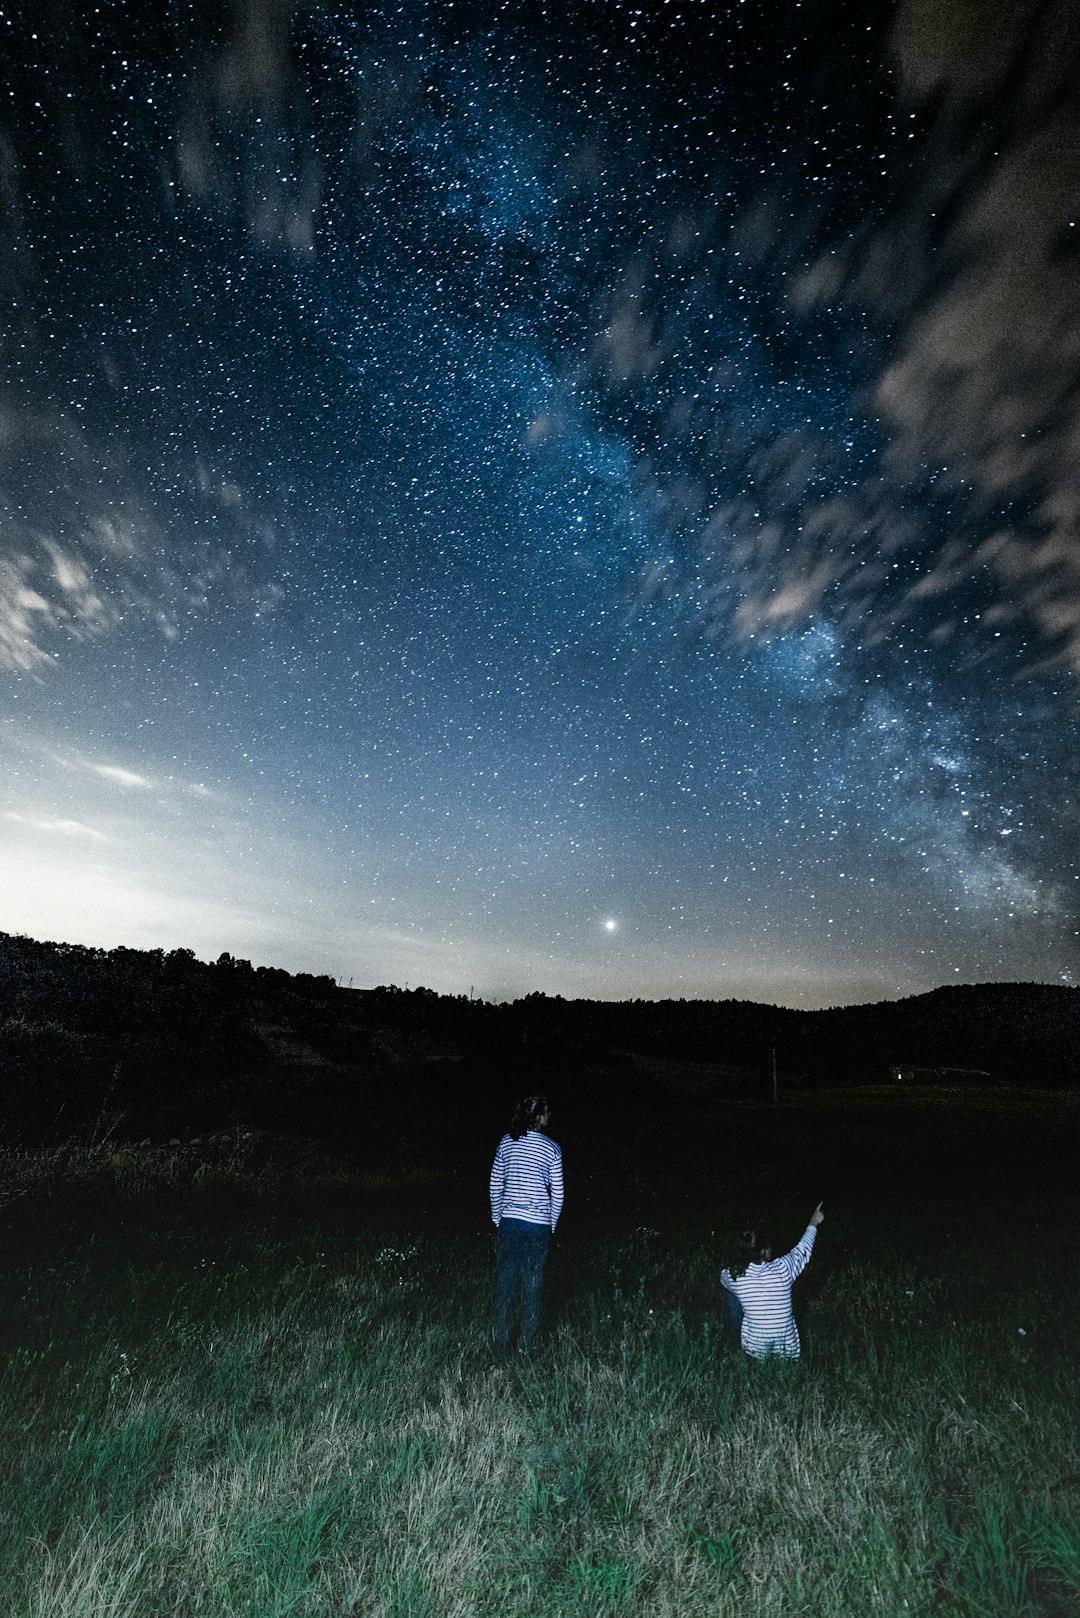 2 people in white shirts in field watching star formations in night sky